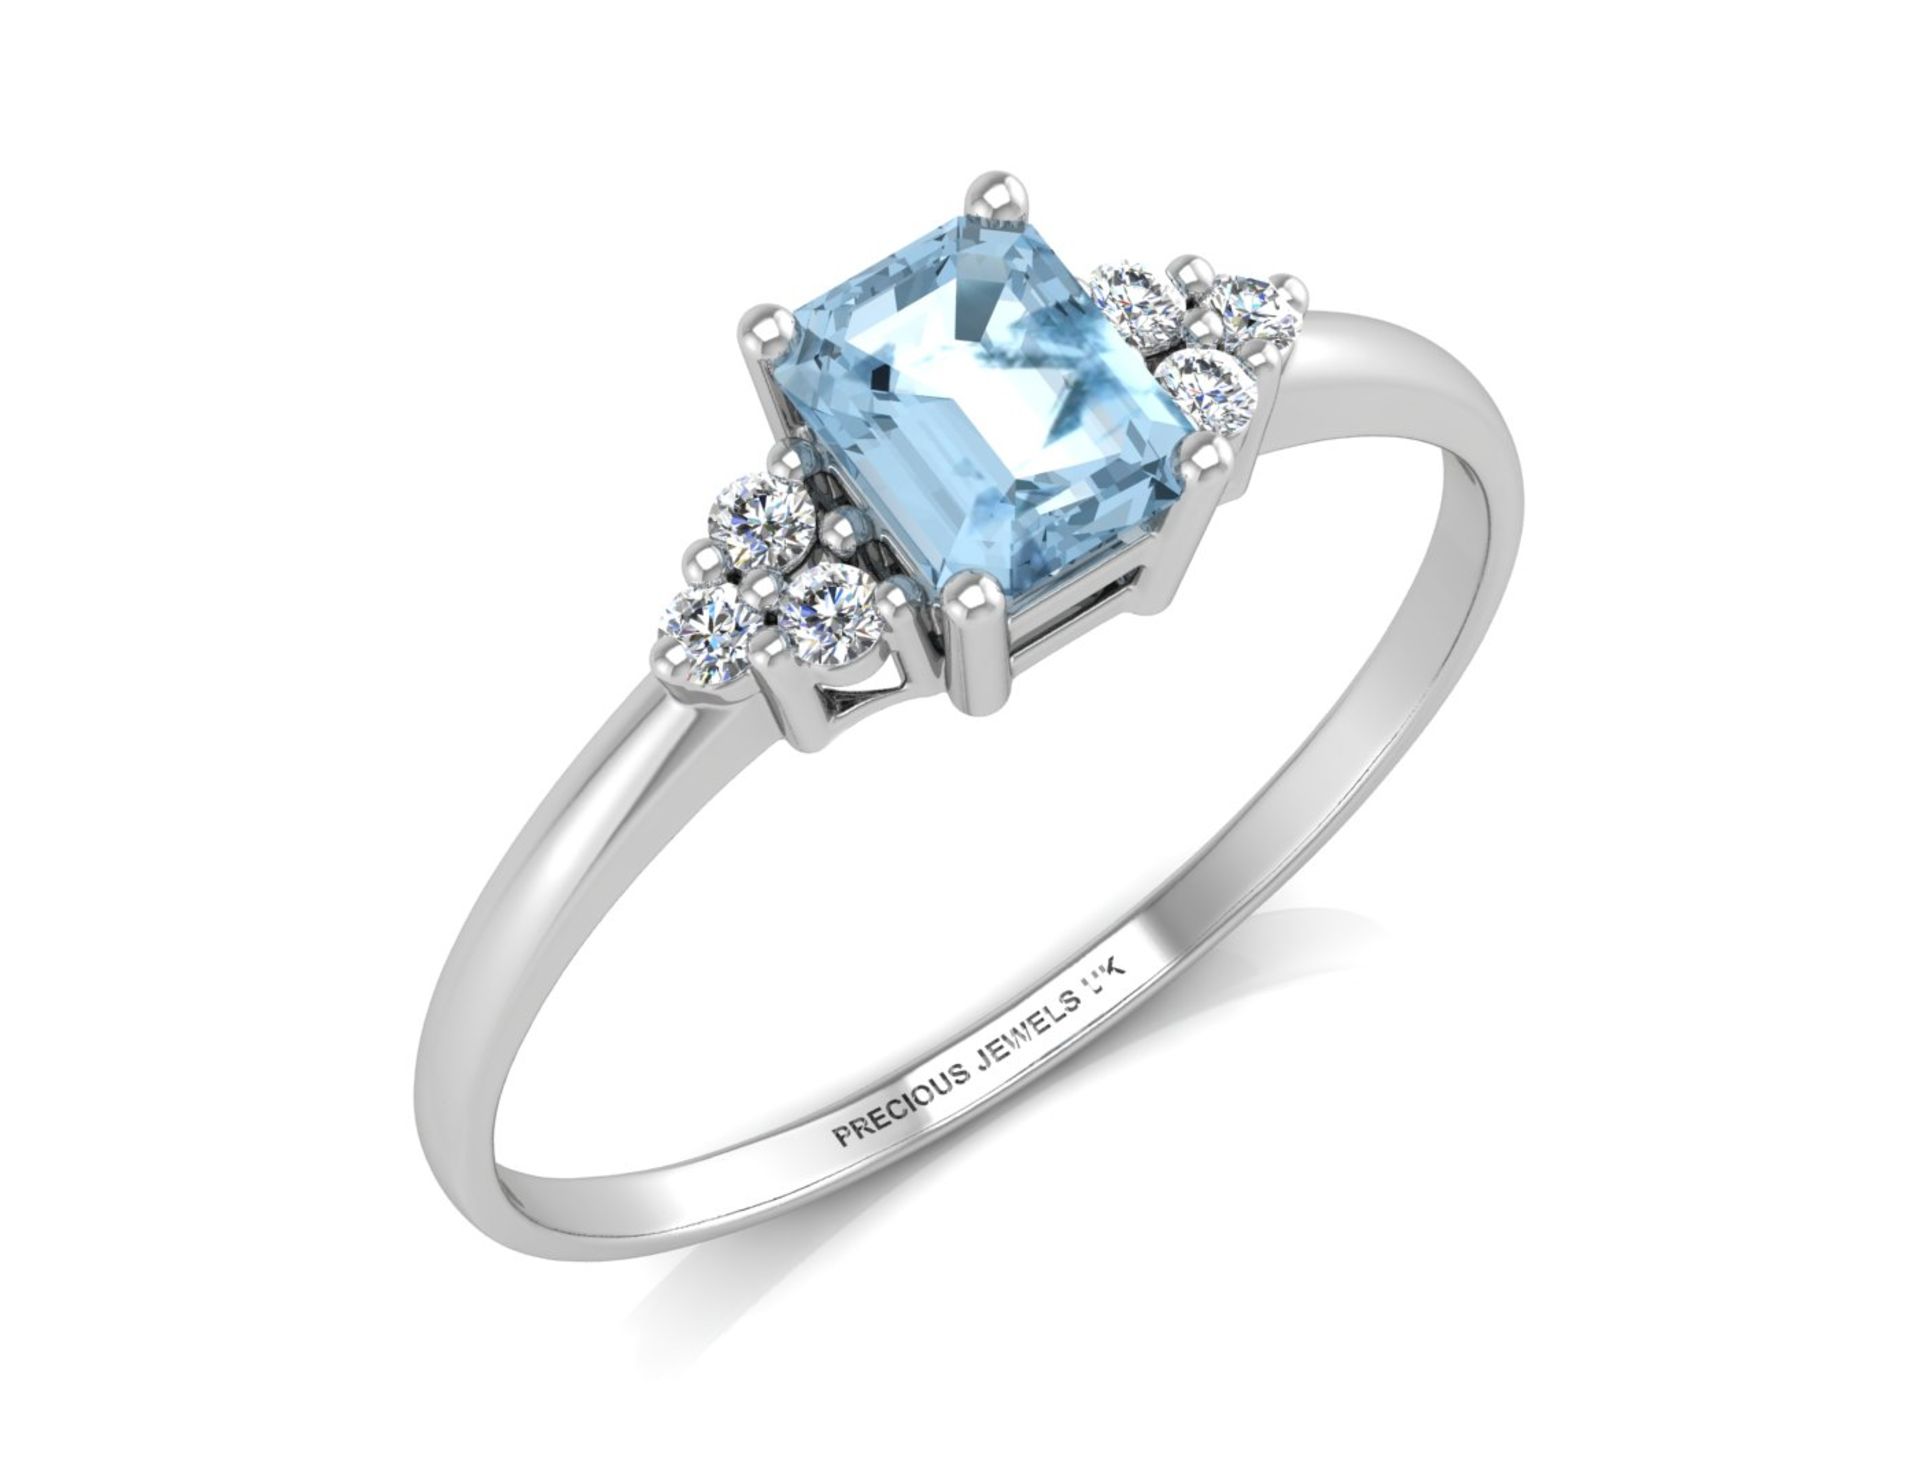 9ct White Gold Fancy Cluster Diamond Blue Topaz Ring 0.06 Carats - Valued by GIE £1,075.00 - An